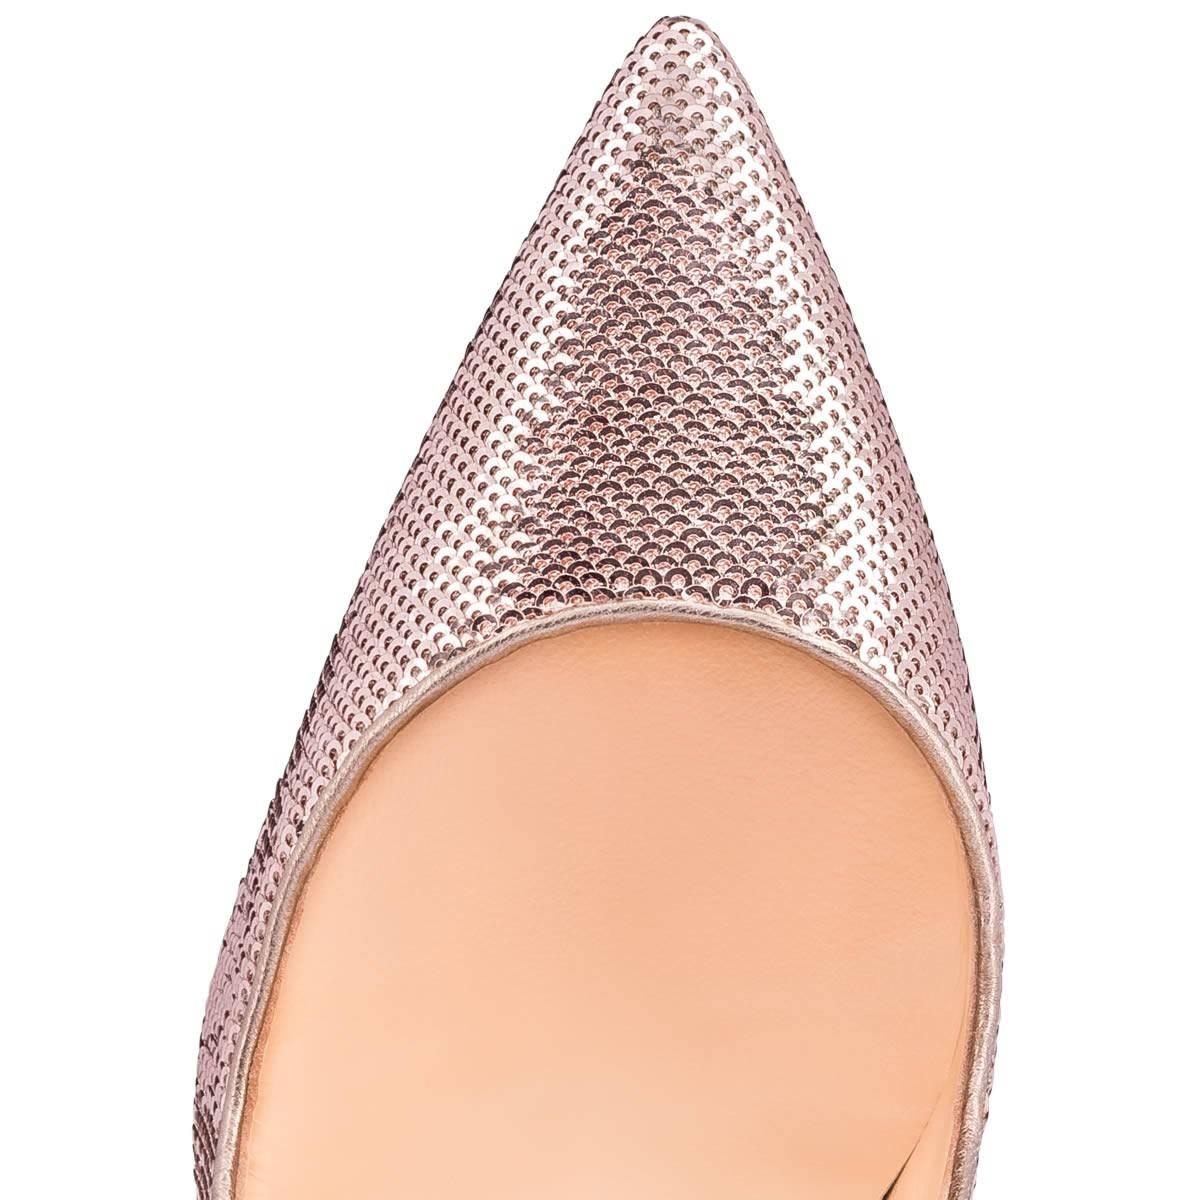 Christian Louboutin New Rose Gold Pink Sequin So Kate High Heels Pumps in Box

Size IT 36.5
Sequin
Slip on 
Made in Italy
Heel height 4.75" (120mm)
Includes original Christian Louboutin dust bag and box


